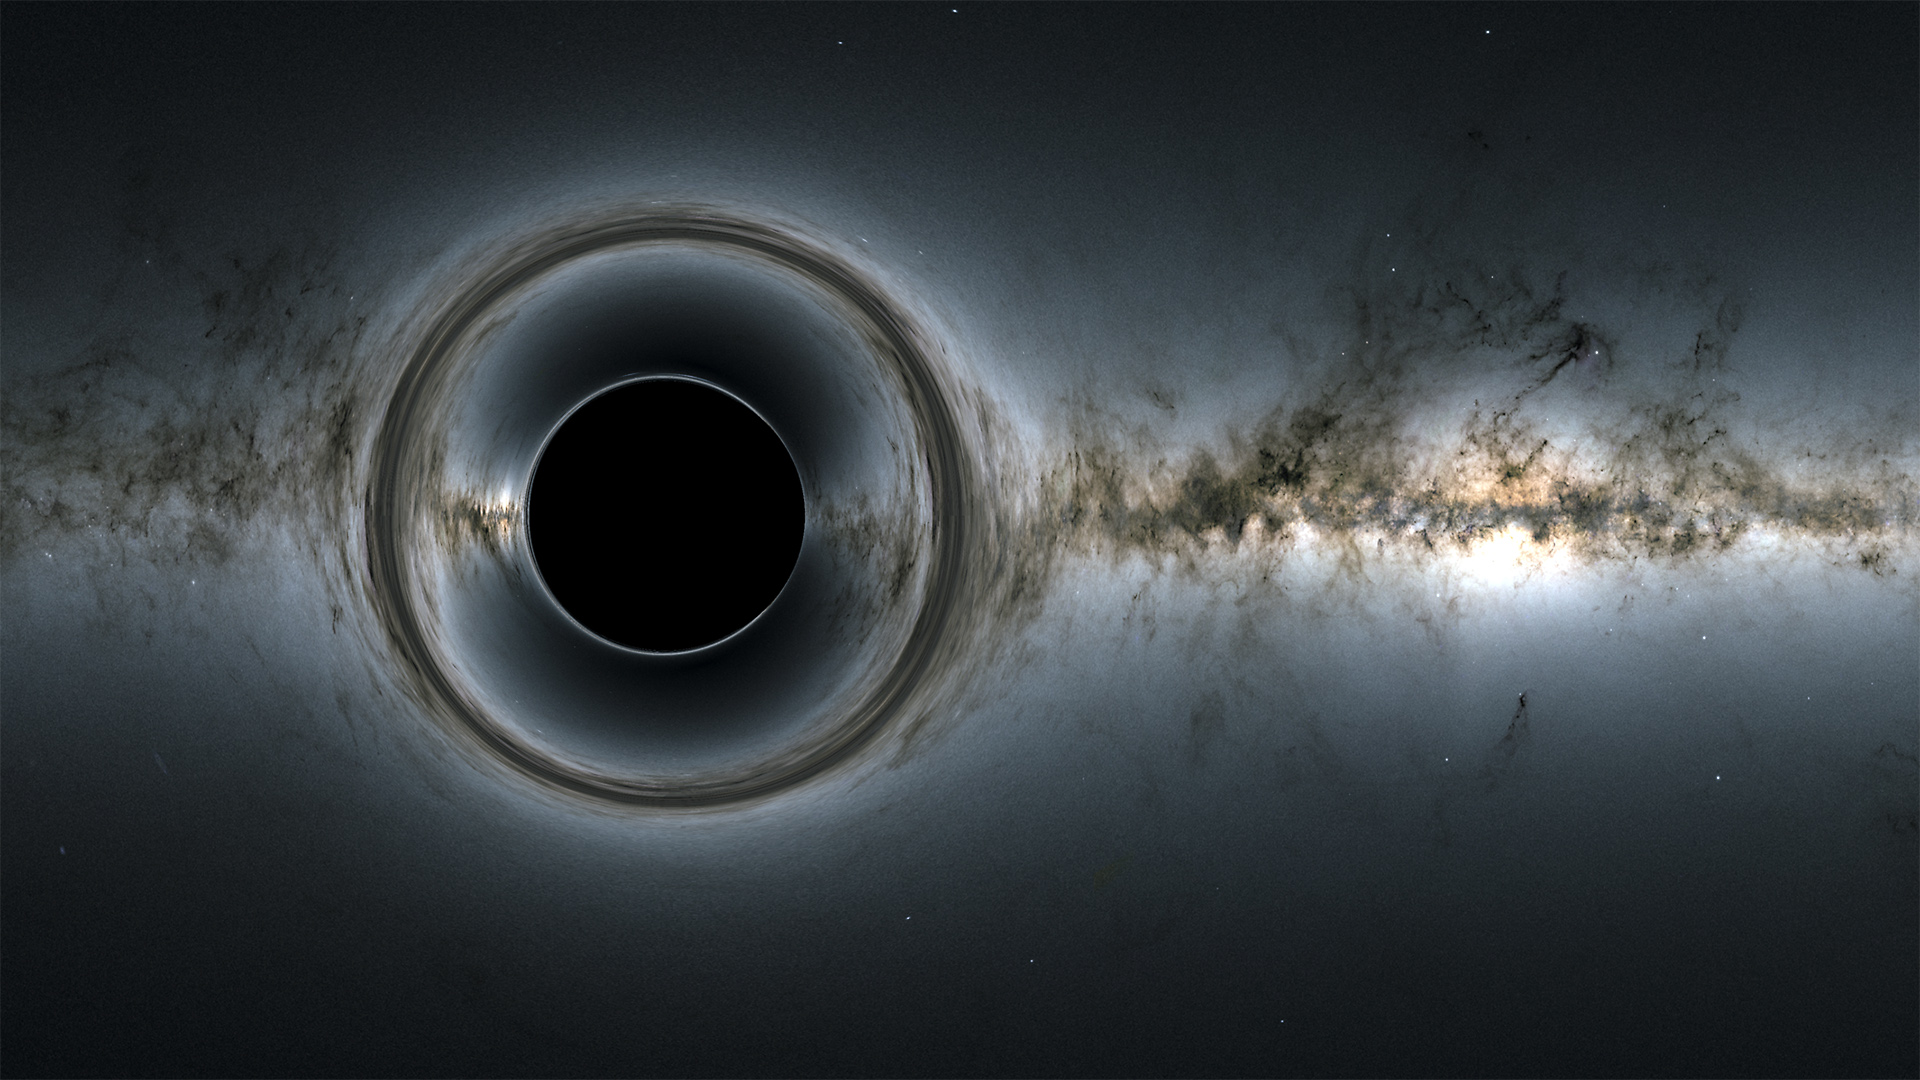 Black Holes As Tools For Quantum Computing By Advanced Extraterrestrial Civilizations